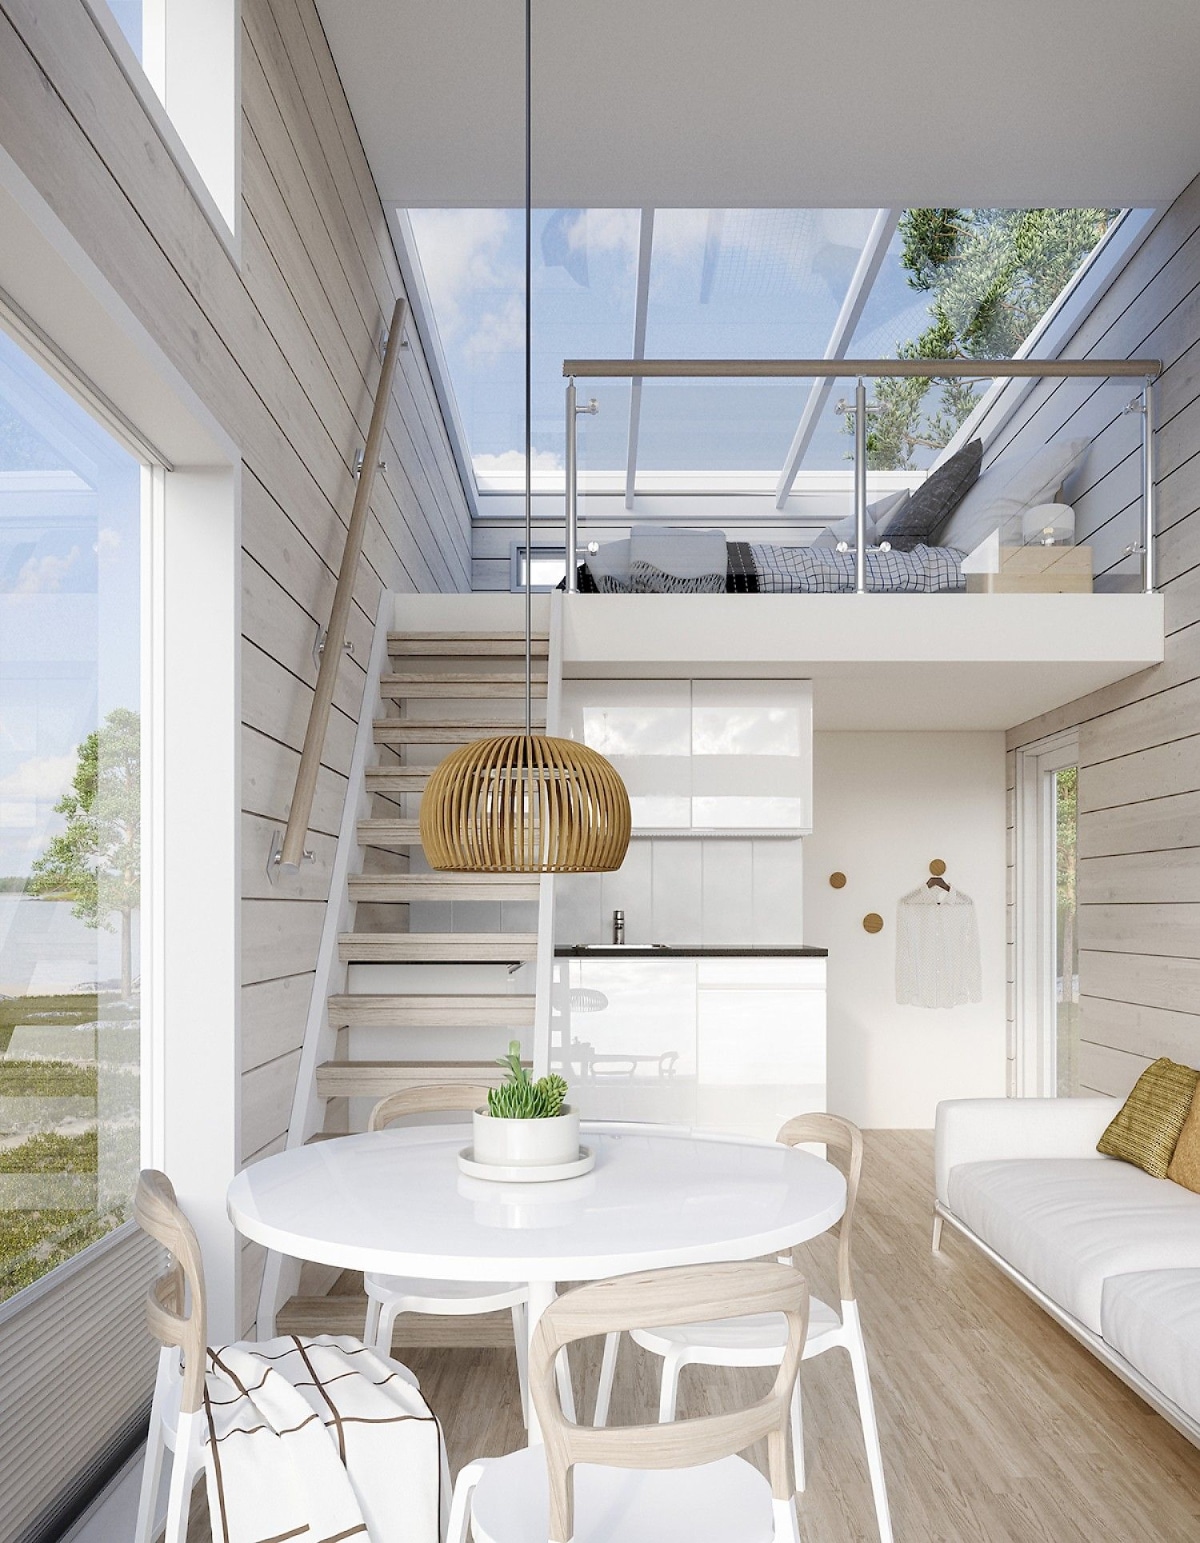 Loft Style tiny home with glass roof